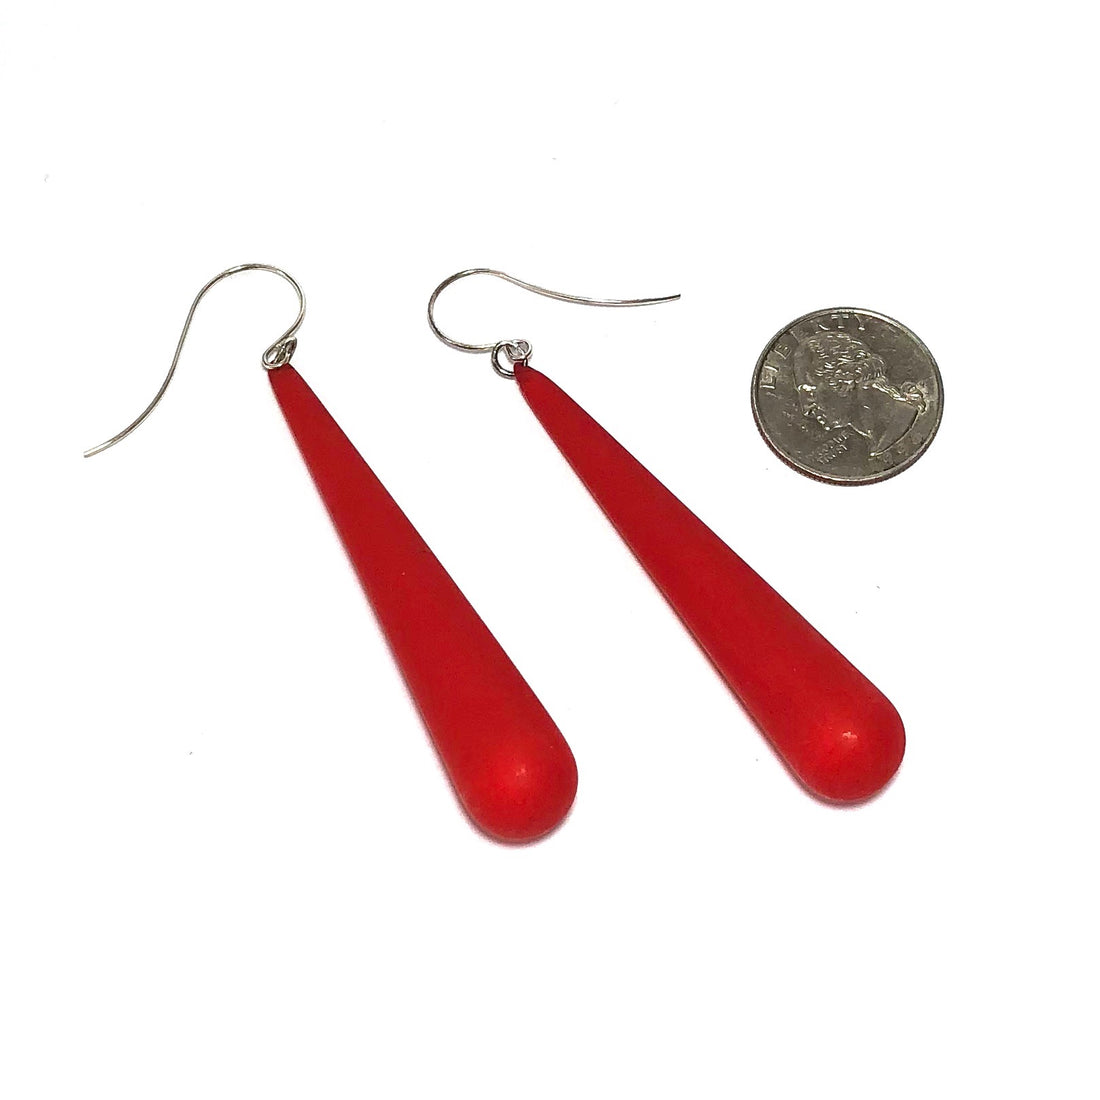 Cherry Red Frosted Long Teardrop lucite statement earrings